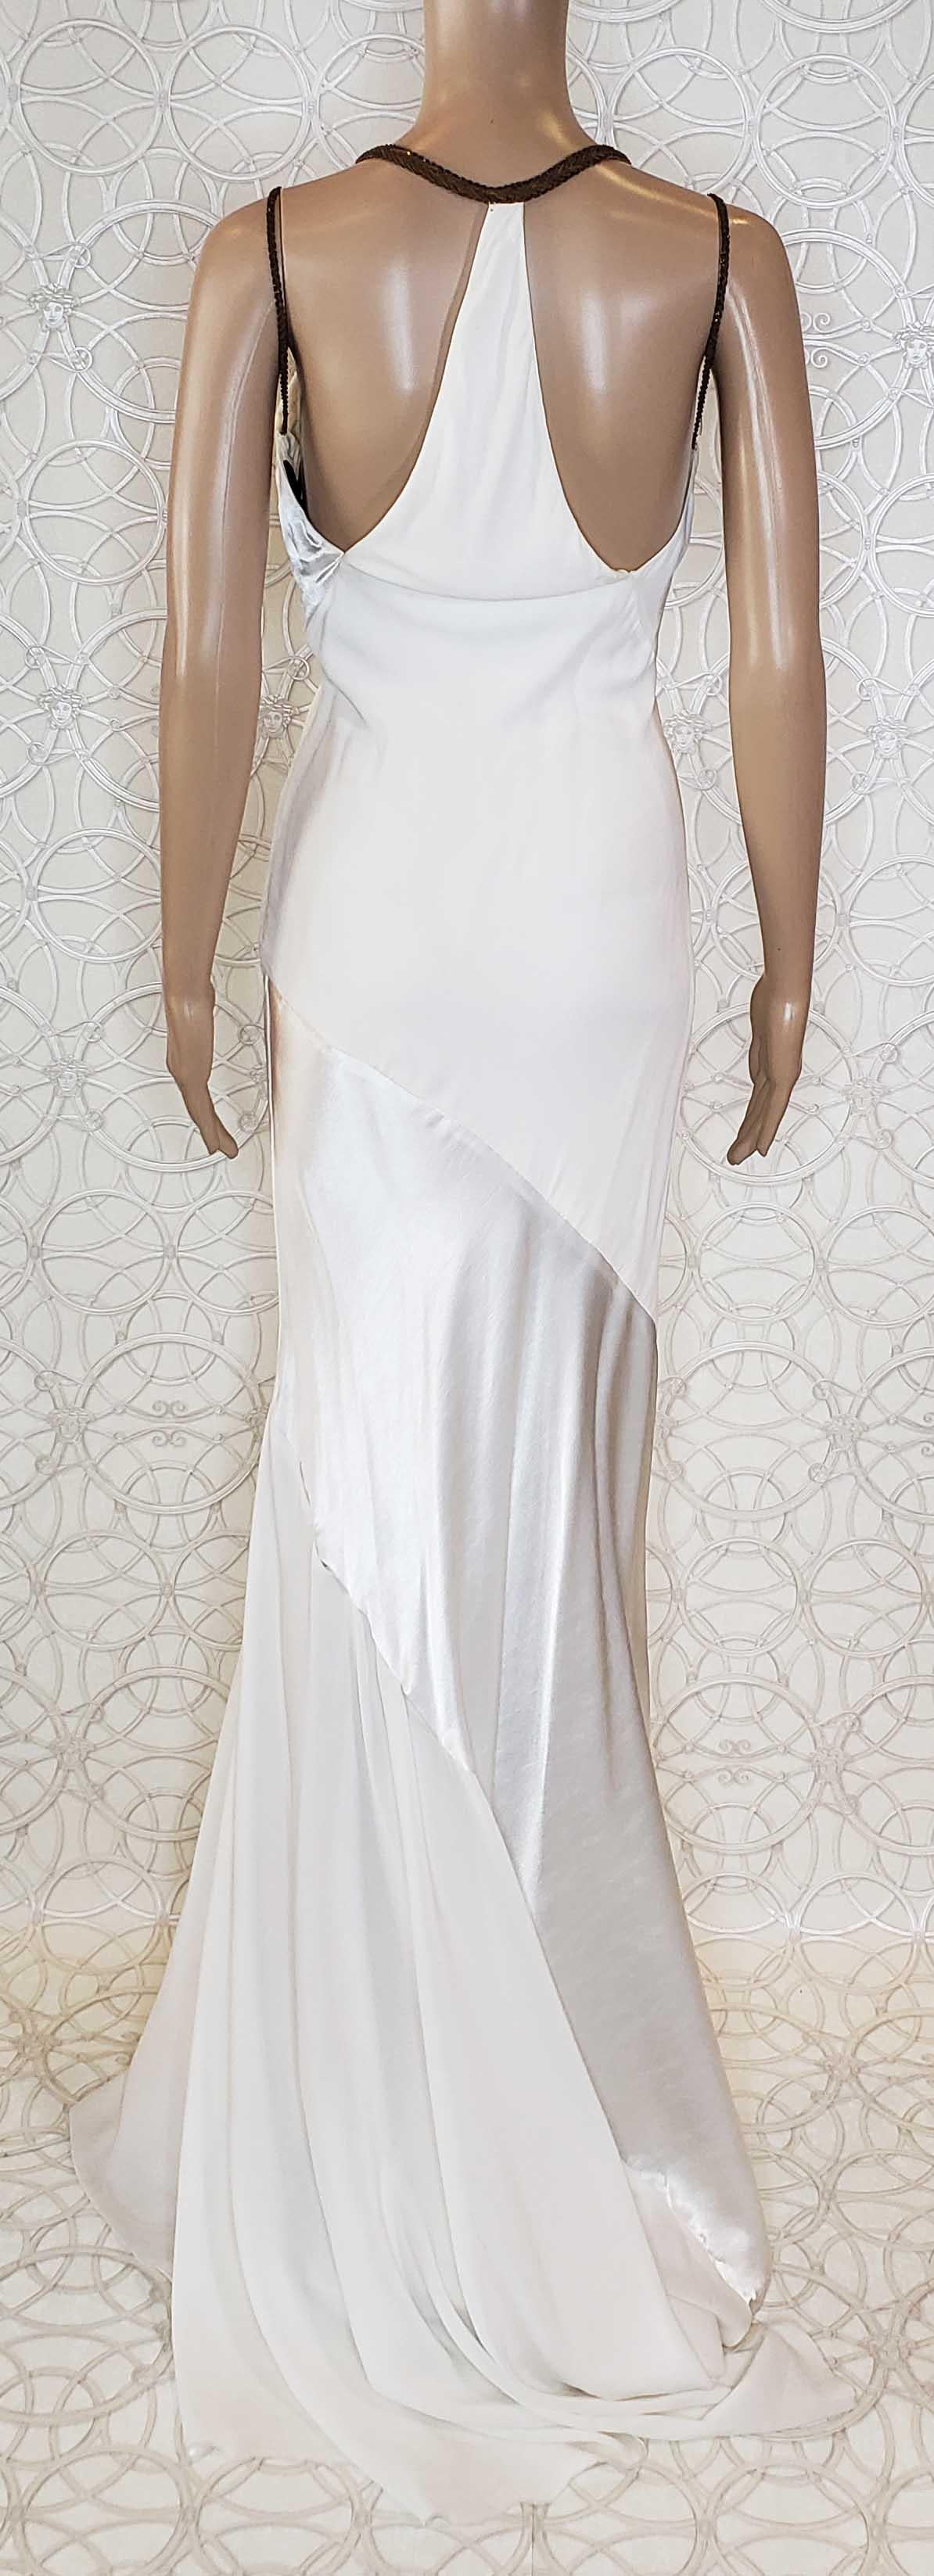 F/W 2014 Look # 51 NEW VERSACE WHITE GOWN DRESS as seen on Heidi 38 - 2 For Sale 5